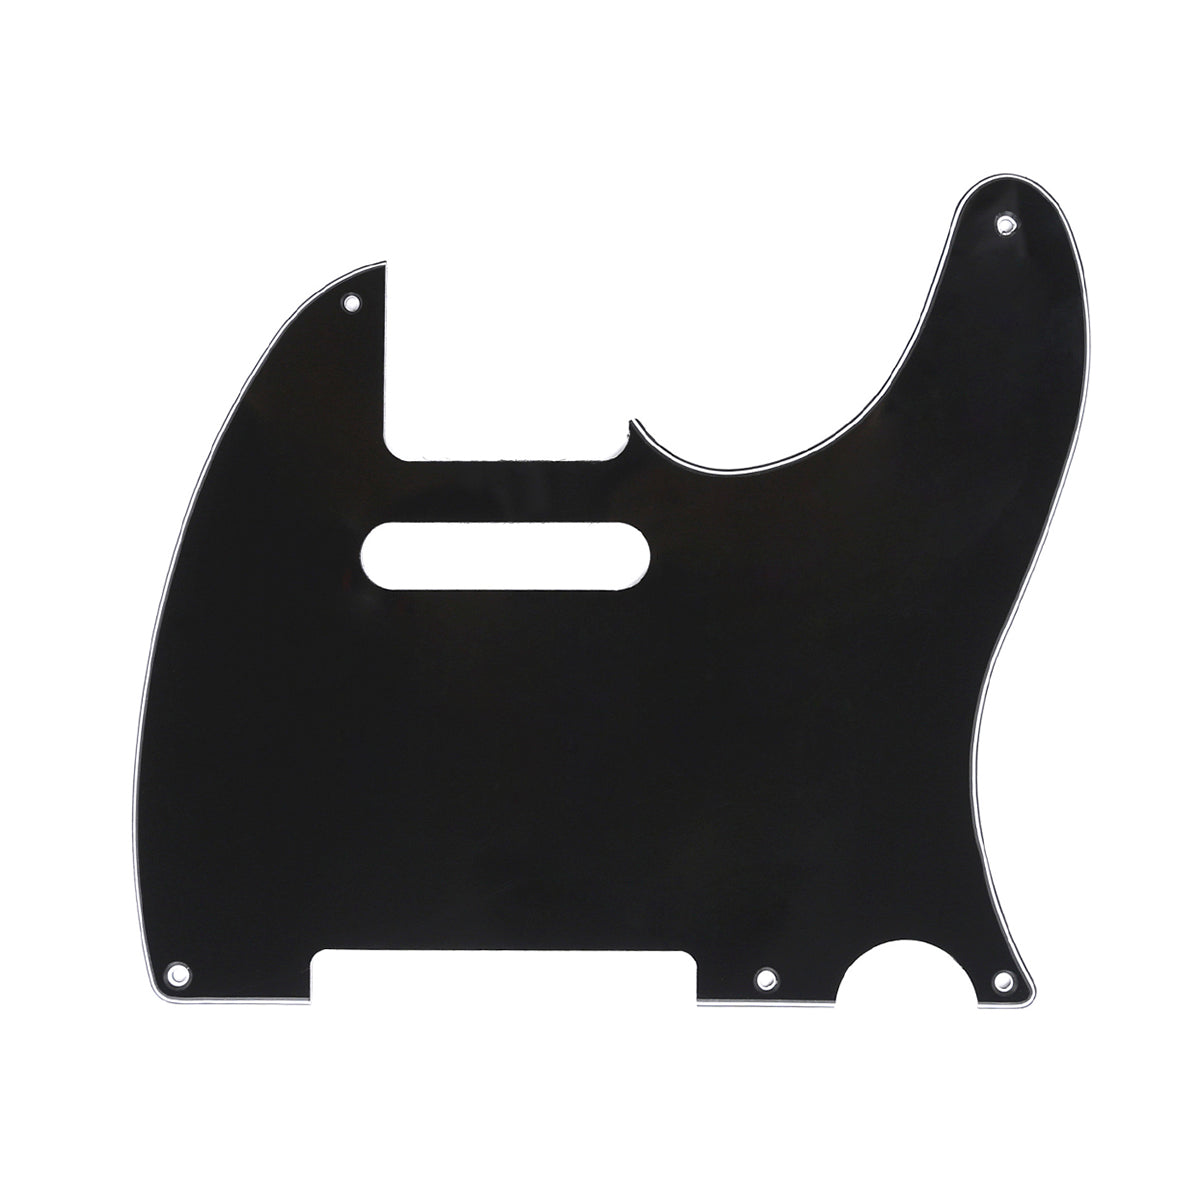 Musiclily 5 Hole Vintage Tele Pickguard for Fender American/Mexican Made Standard Telecaster Style Electric Guitar, 3Ply Black